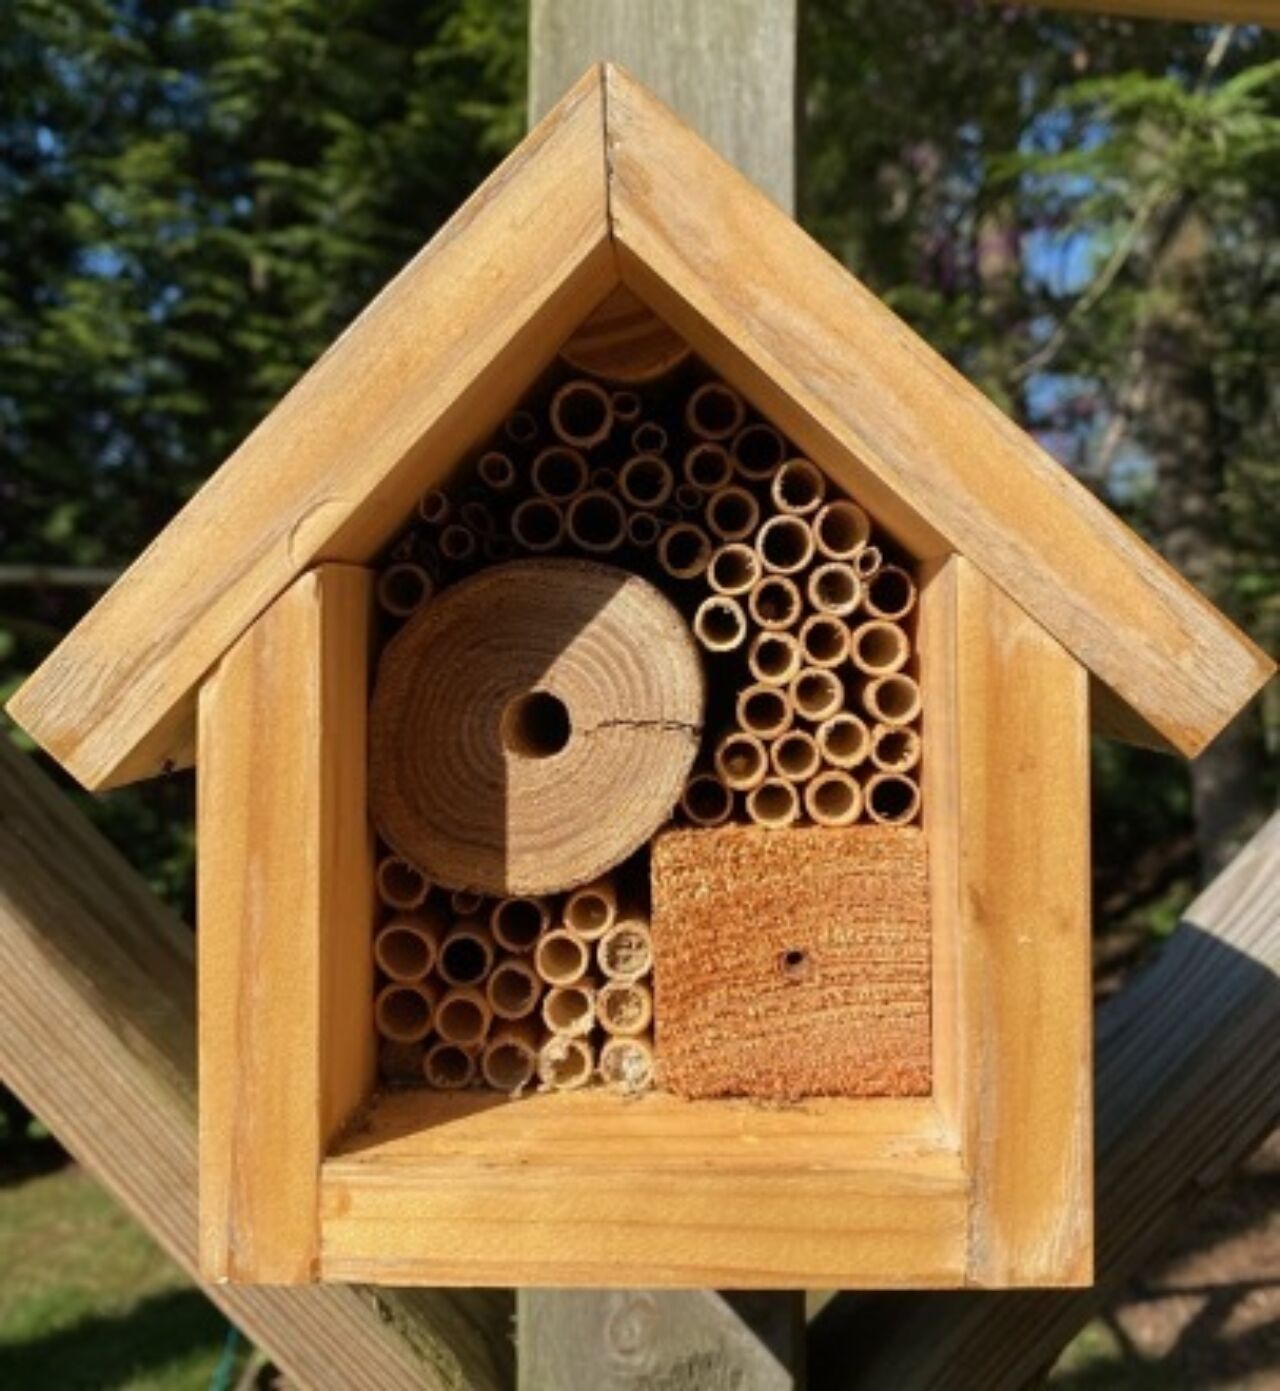 a small wooden bee hotel, about 8 inches tall filled with empty tubes and drilled wood blocks in a home garden